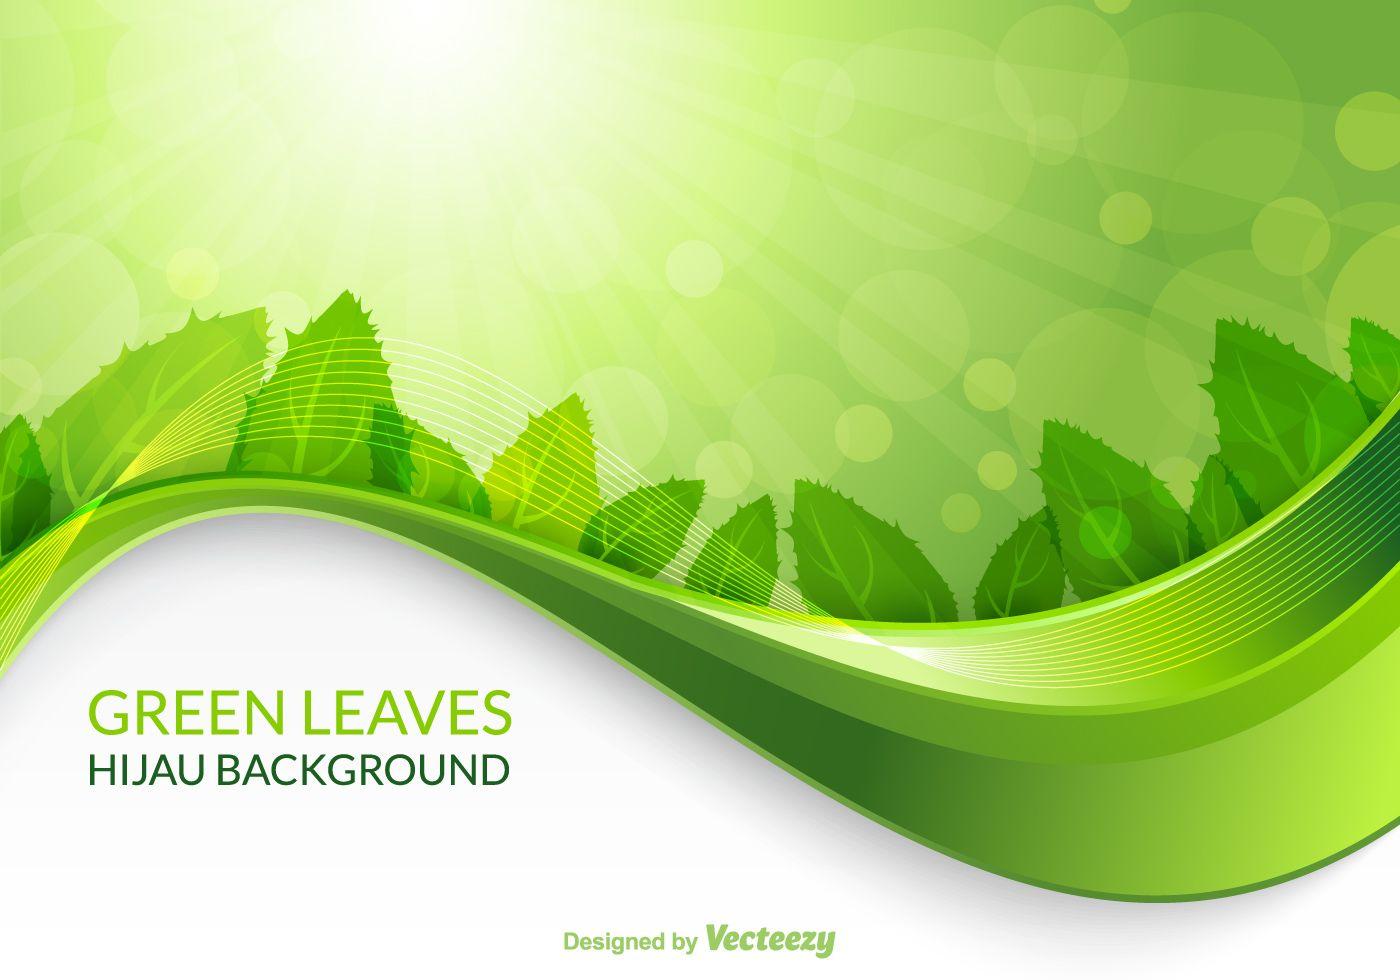 Green Background Free Vector Art - (39420 Free Downloads)